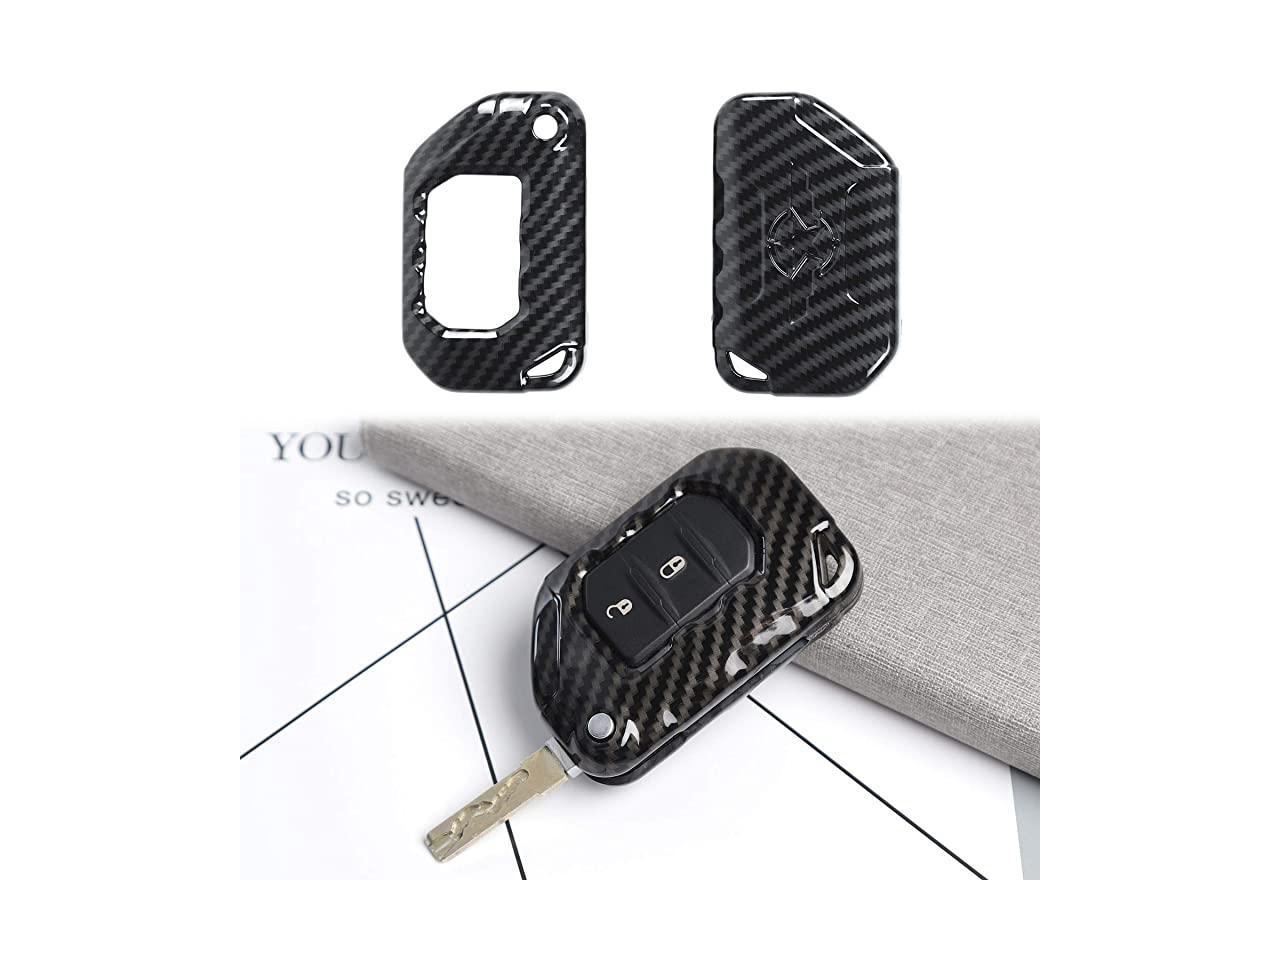 for JL JT Jeep Key Fob Cover Skin Case Protection for Jeep Wrangler JL JLU  2018-2020, for Jeep Gladiator 2020, Key Replacement Accessories, Carbon  Fiber, 2pcs/set 